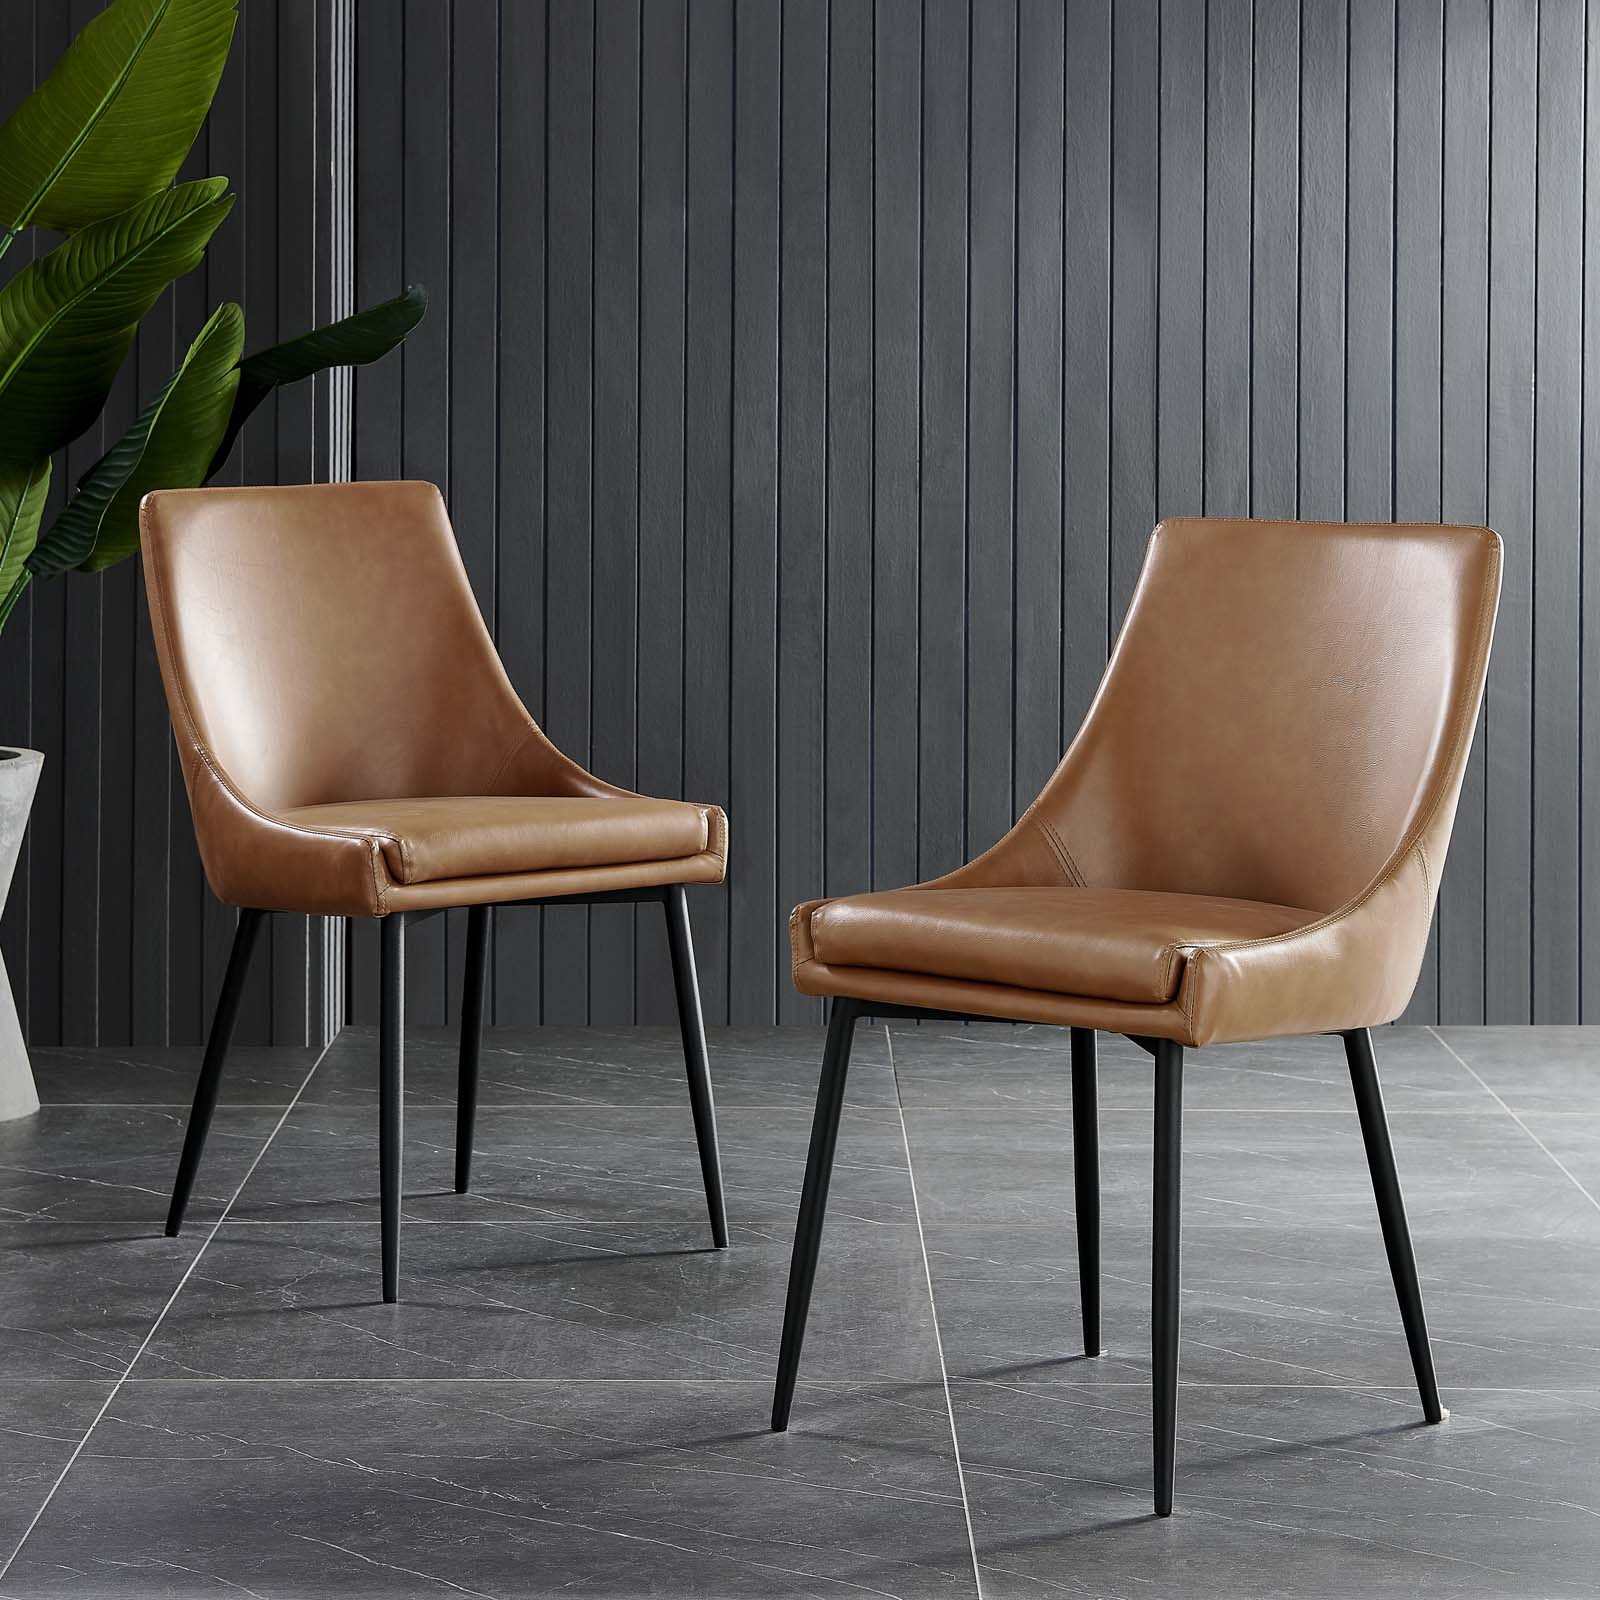 Viscount Vegan Leather Dining Chairs - Set of 2 - East Shore Modern Home Furnishings